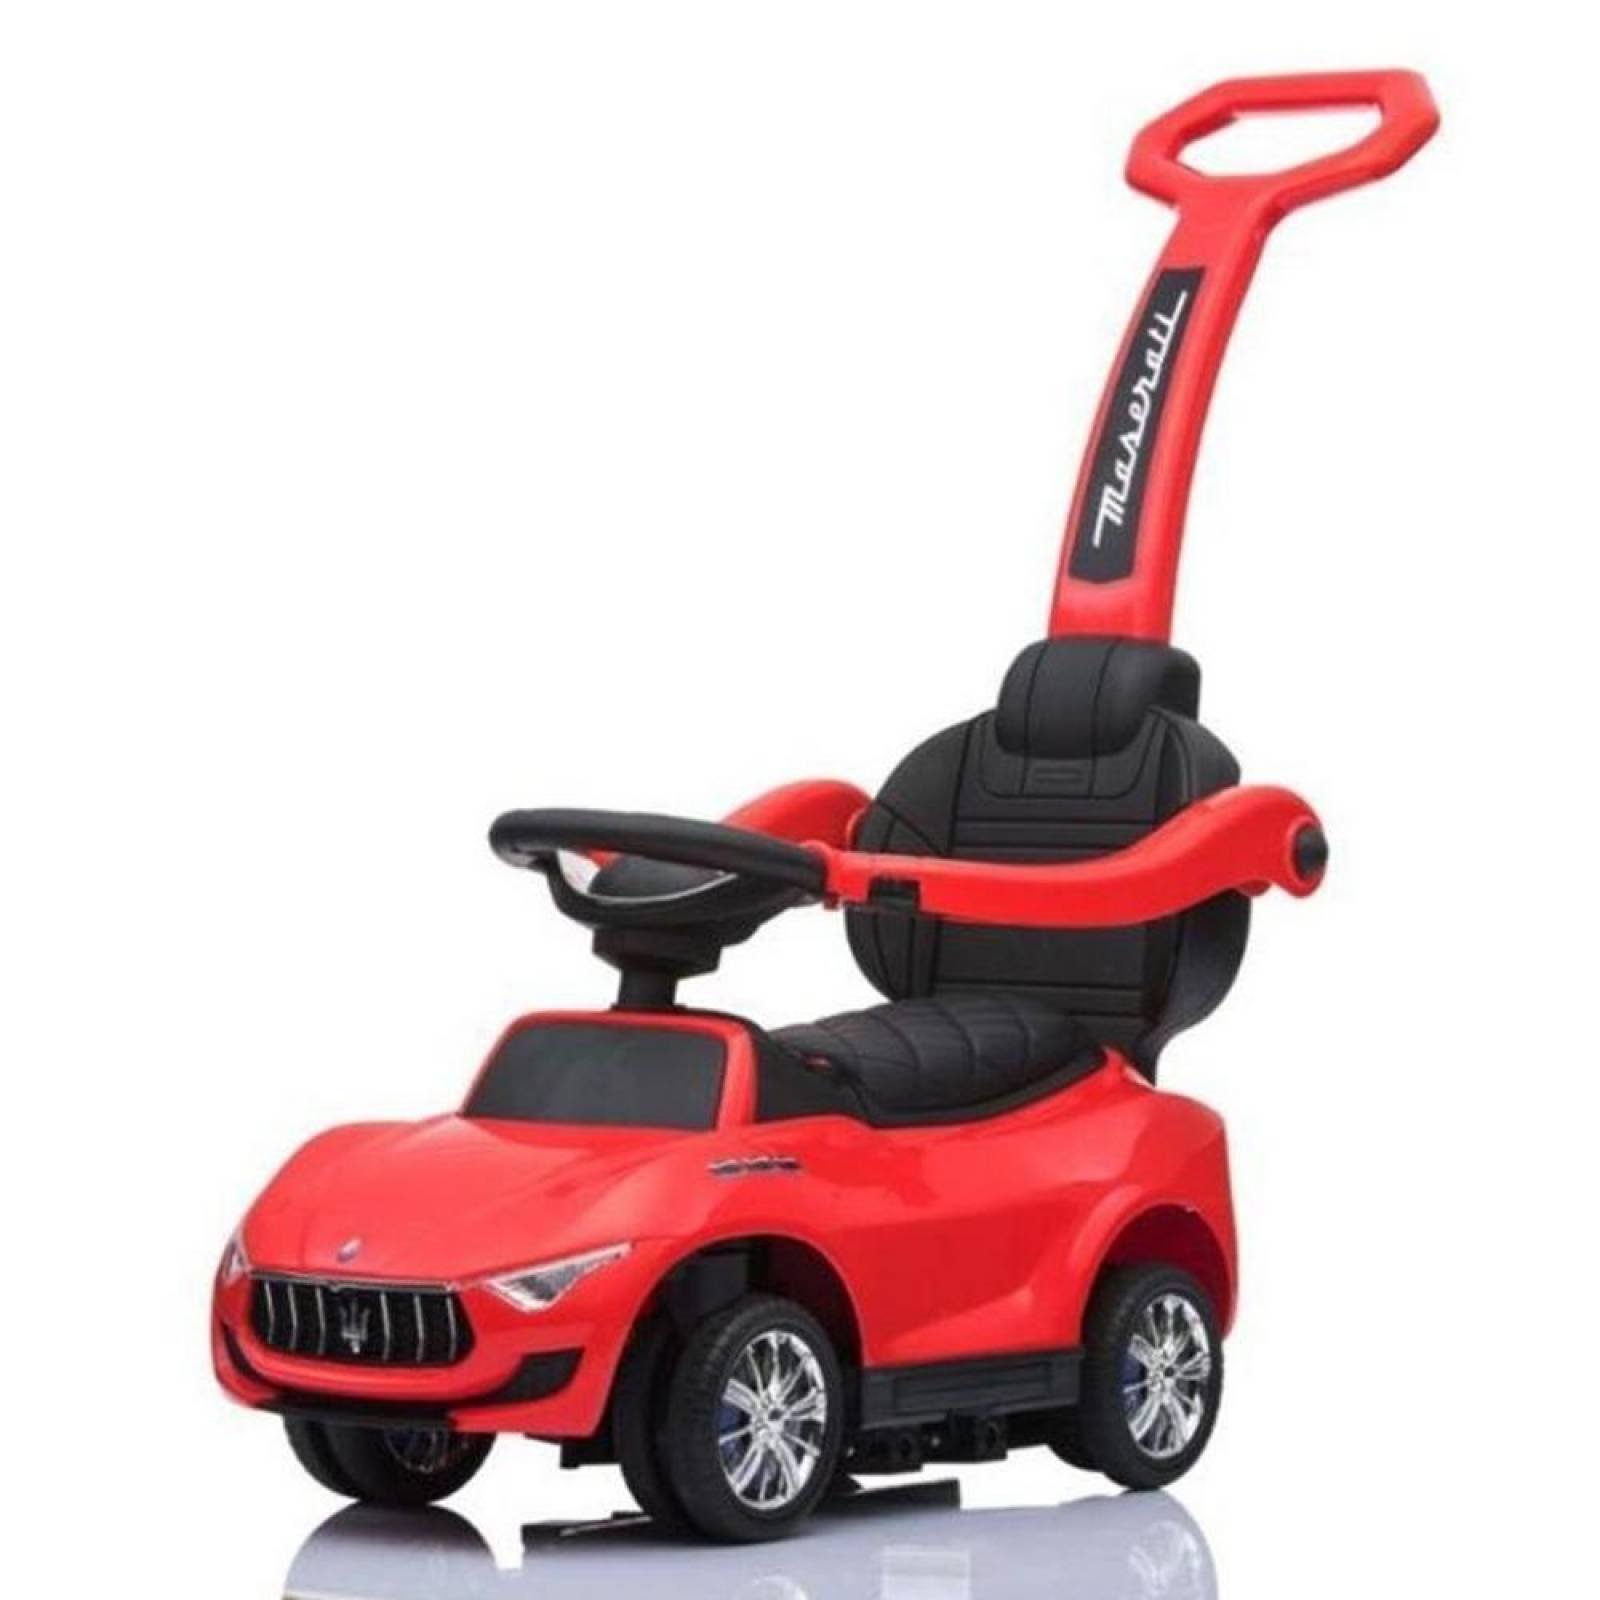 Maserati montable electrico push car Best Ride on Cars (CL) Rojo